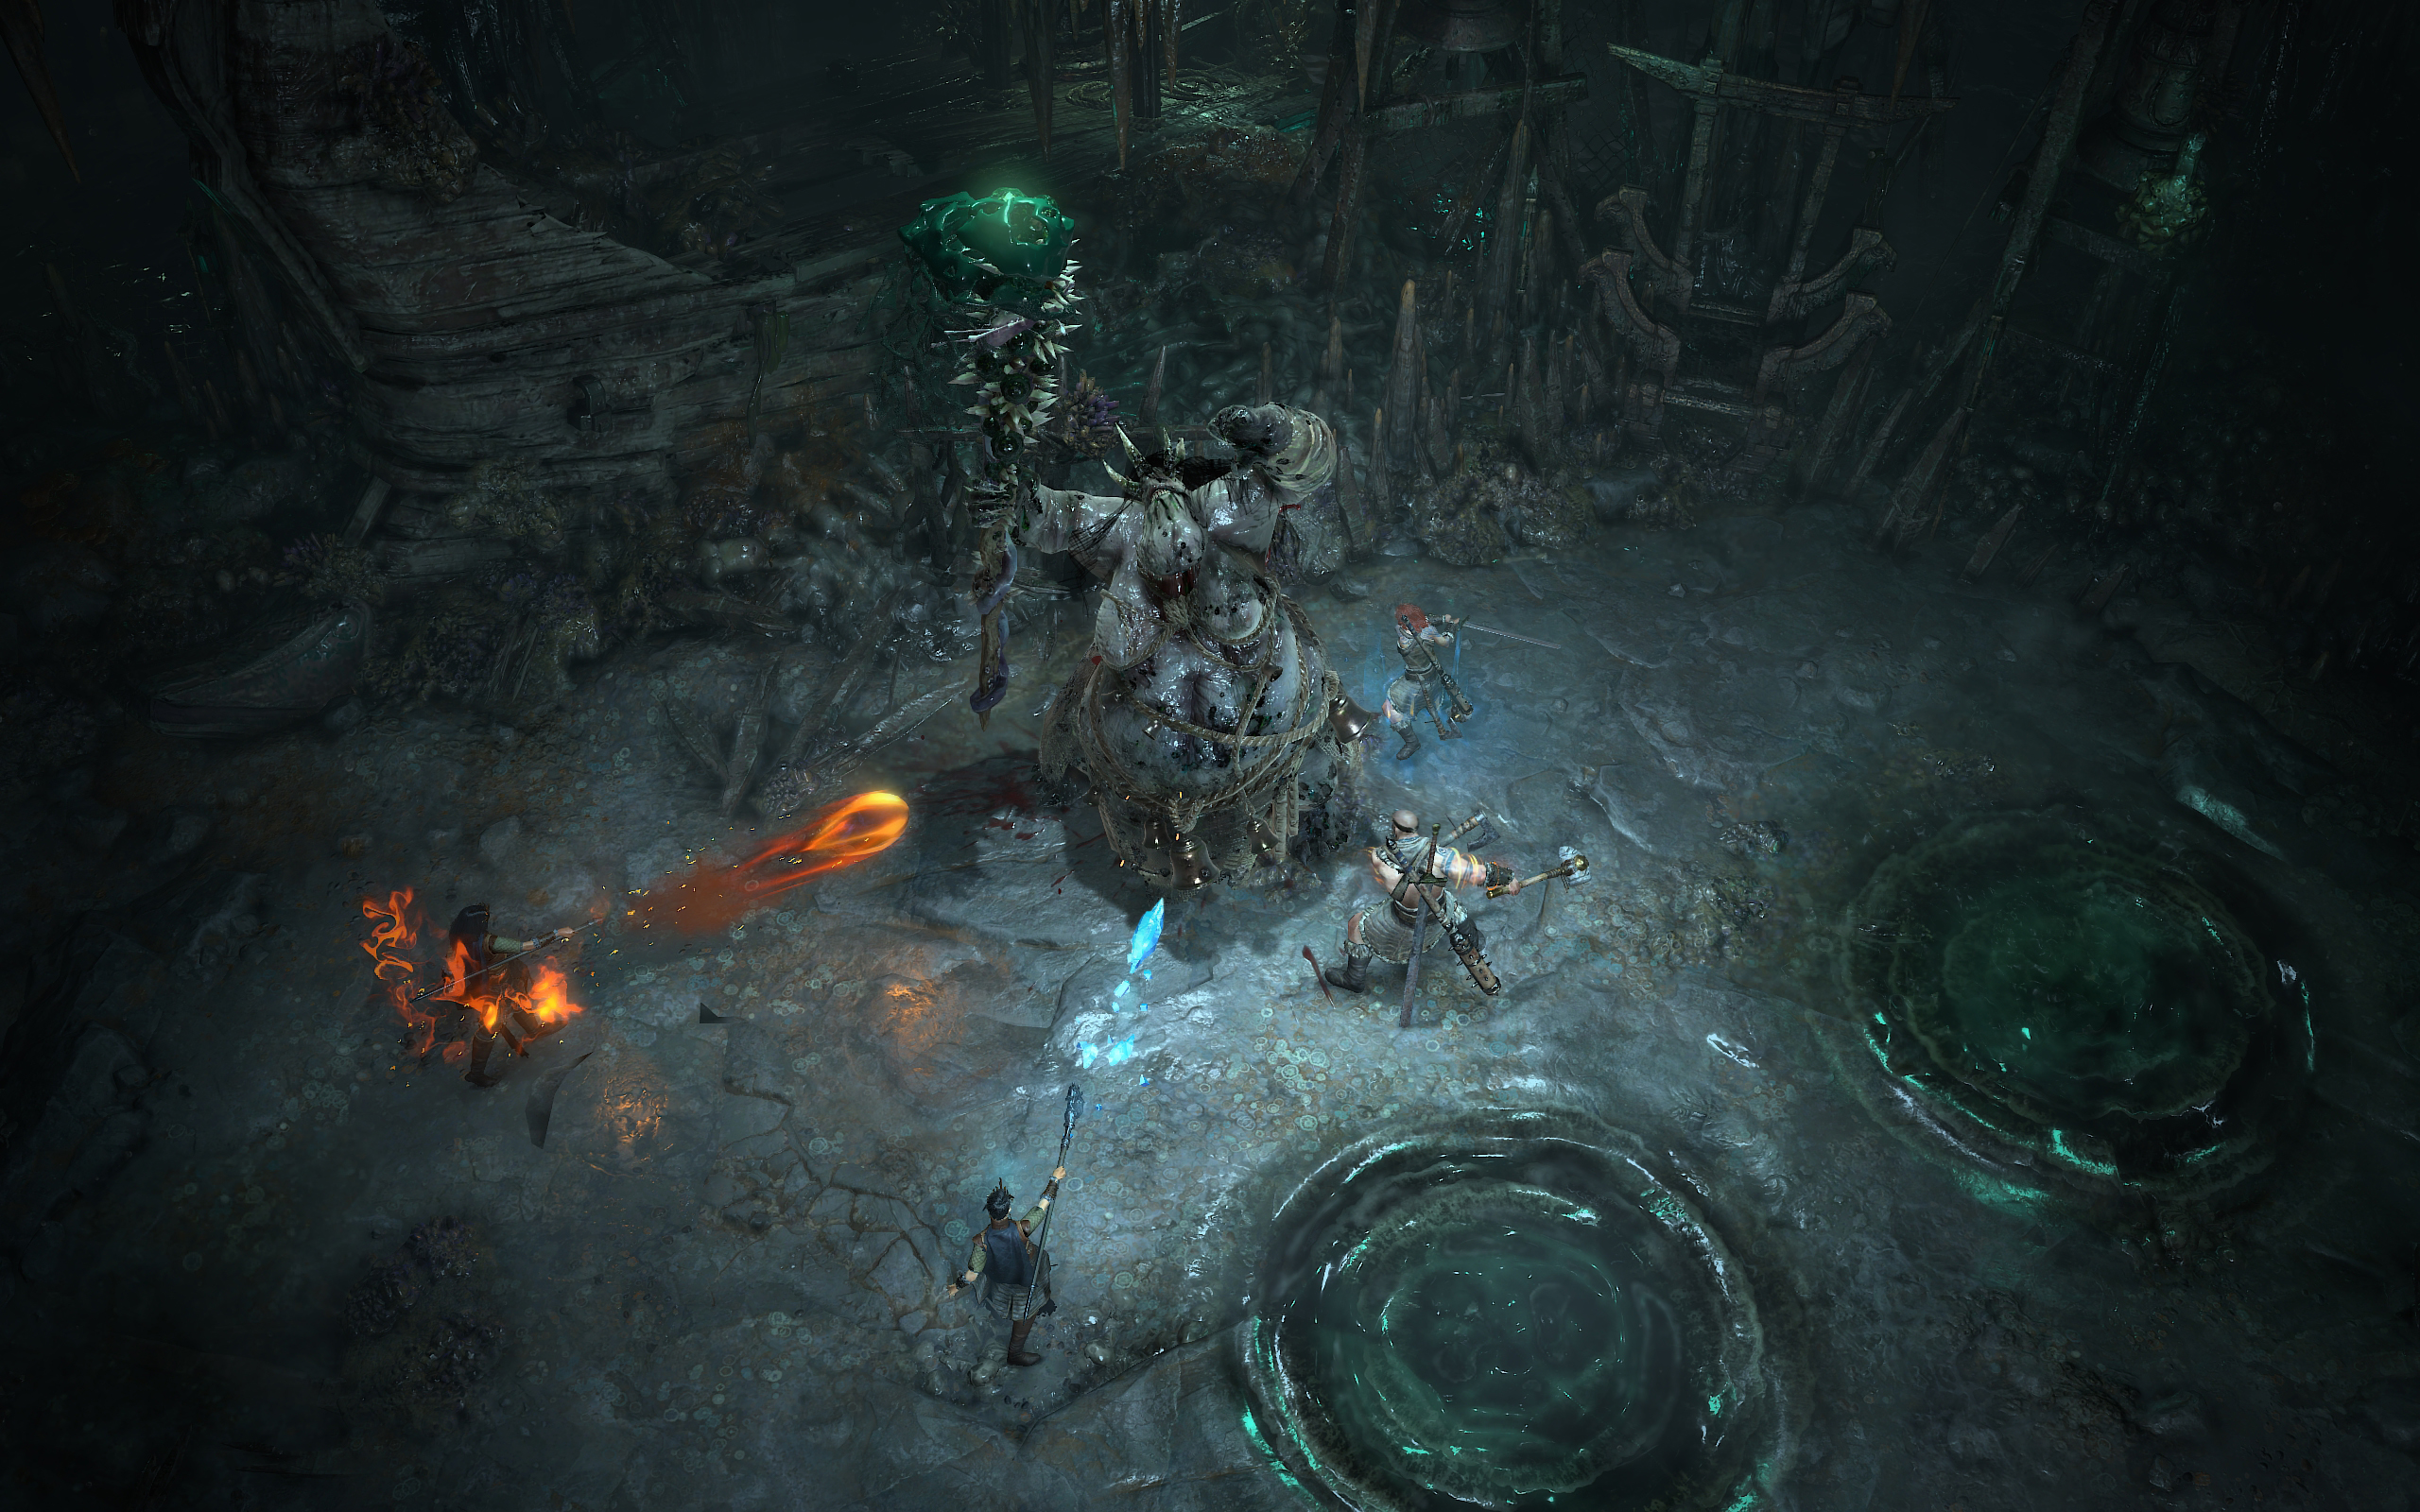 New Details About Diablo IV’s Loot System Suggests it’s Designed With Diversity in Mind